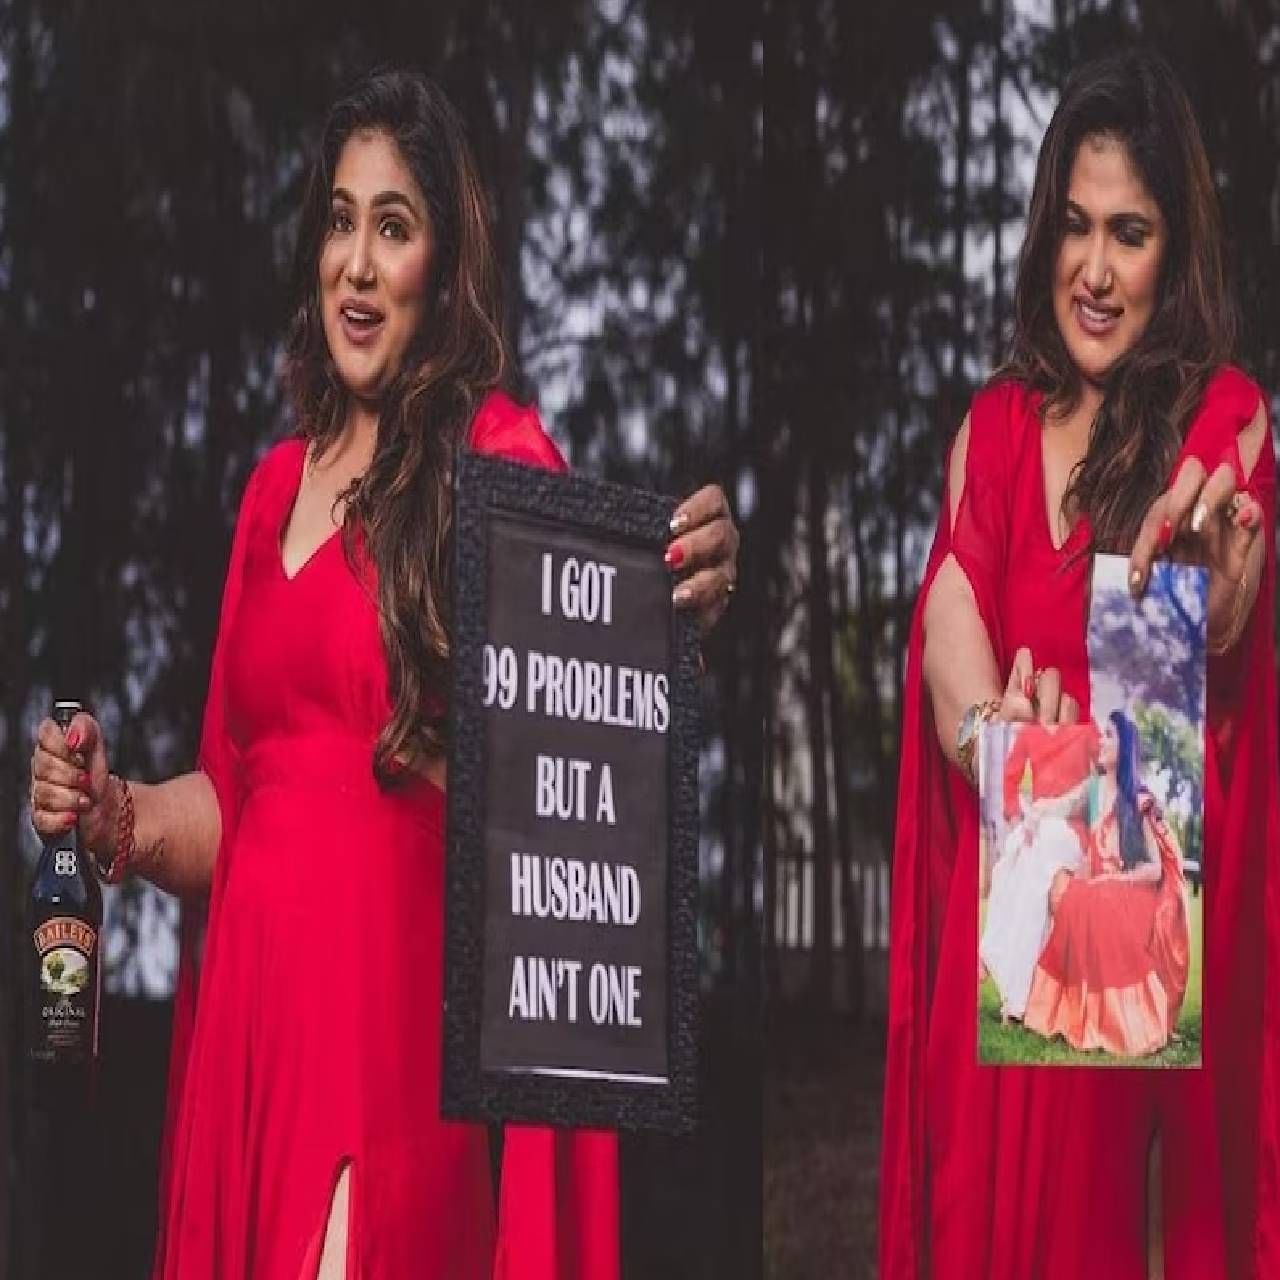 The photos of this woman's divorce photo shoot are going viral on social media.  The woman is seen celebrating on social media with a bottle of liquor in her hand.